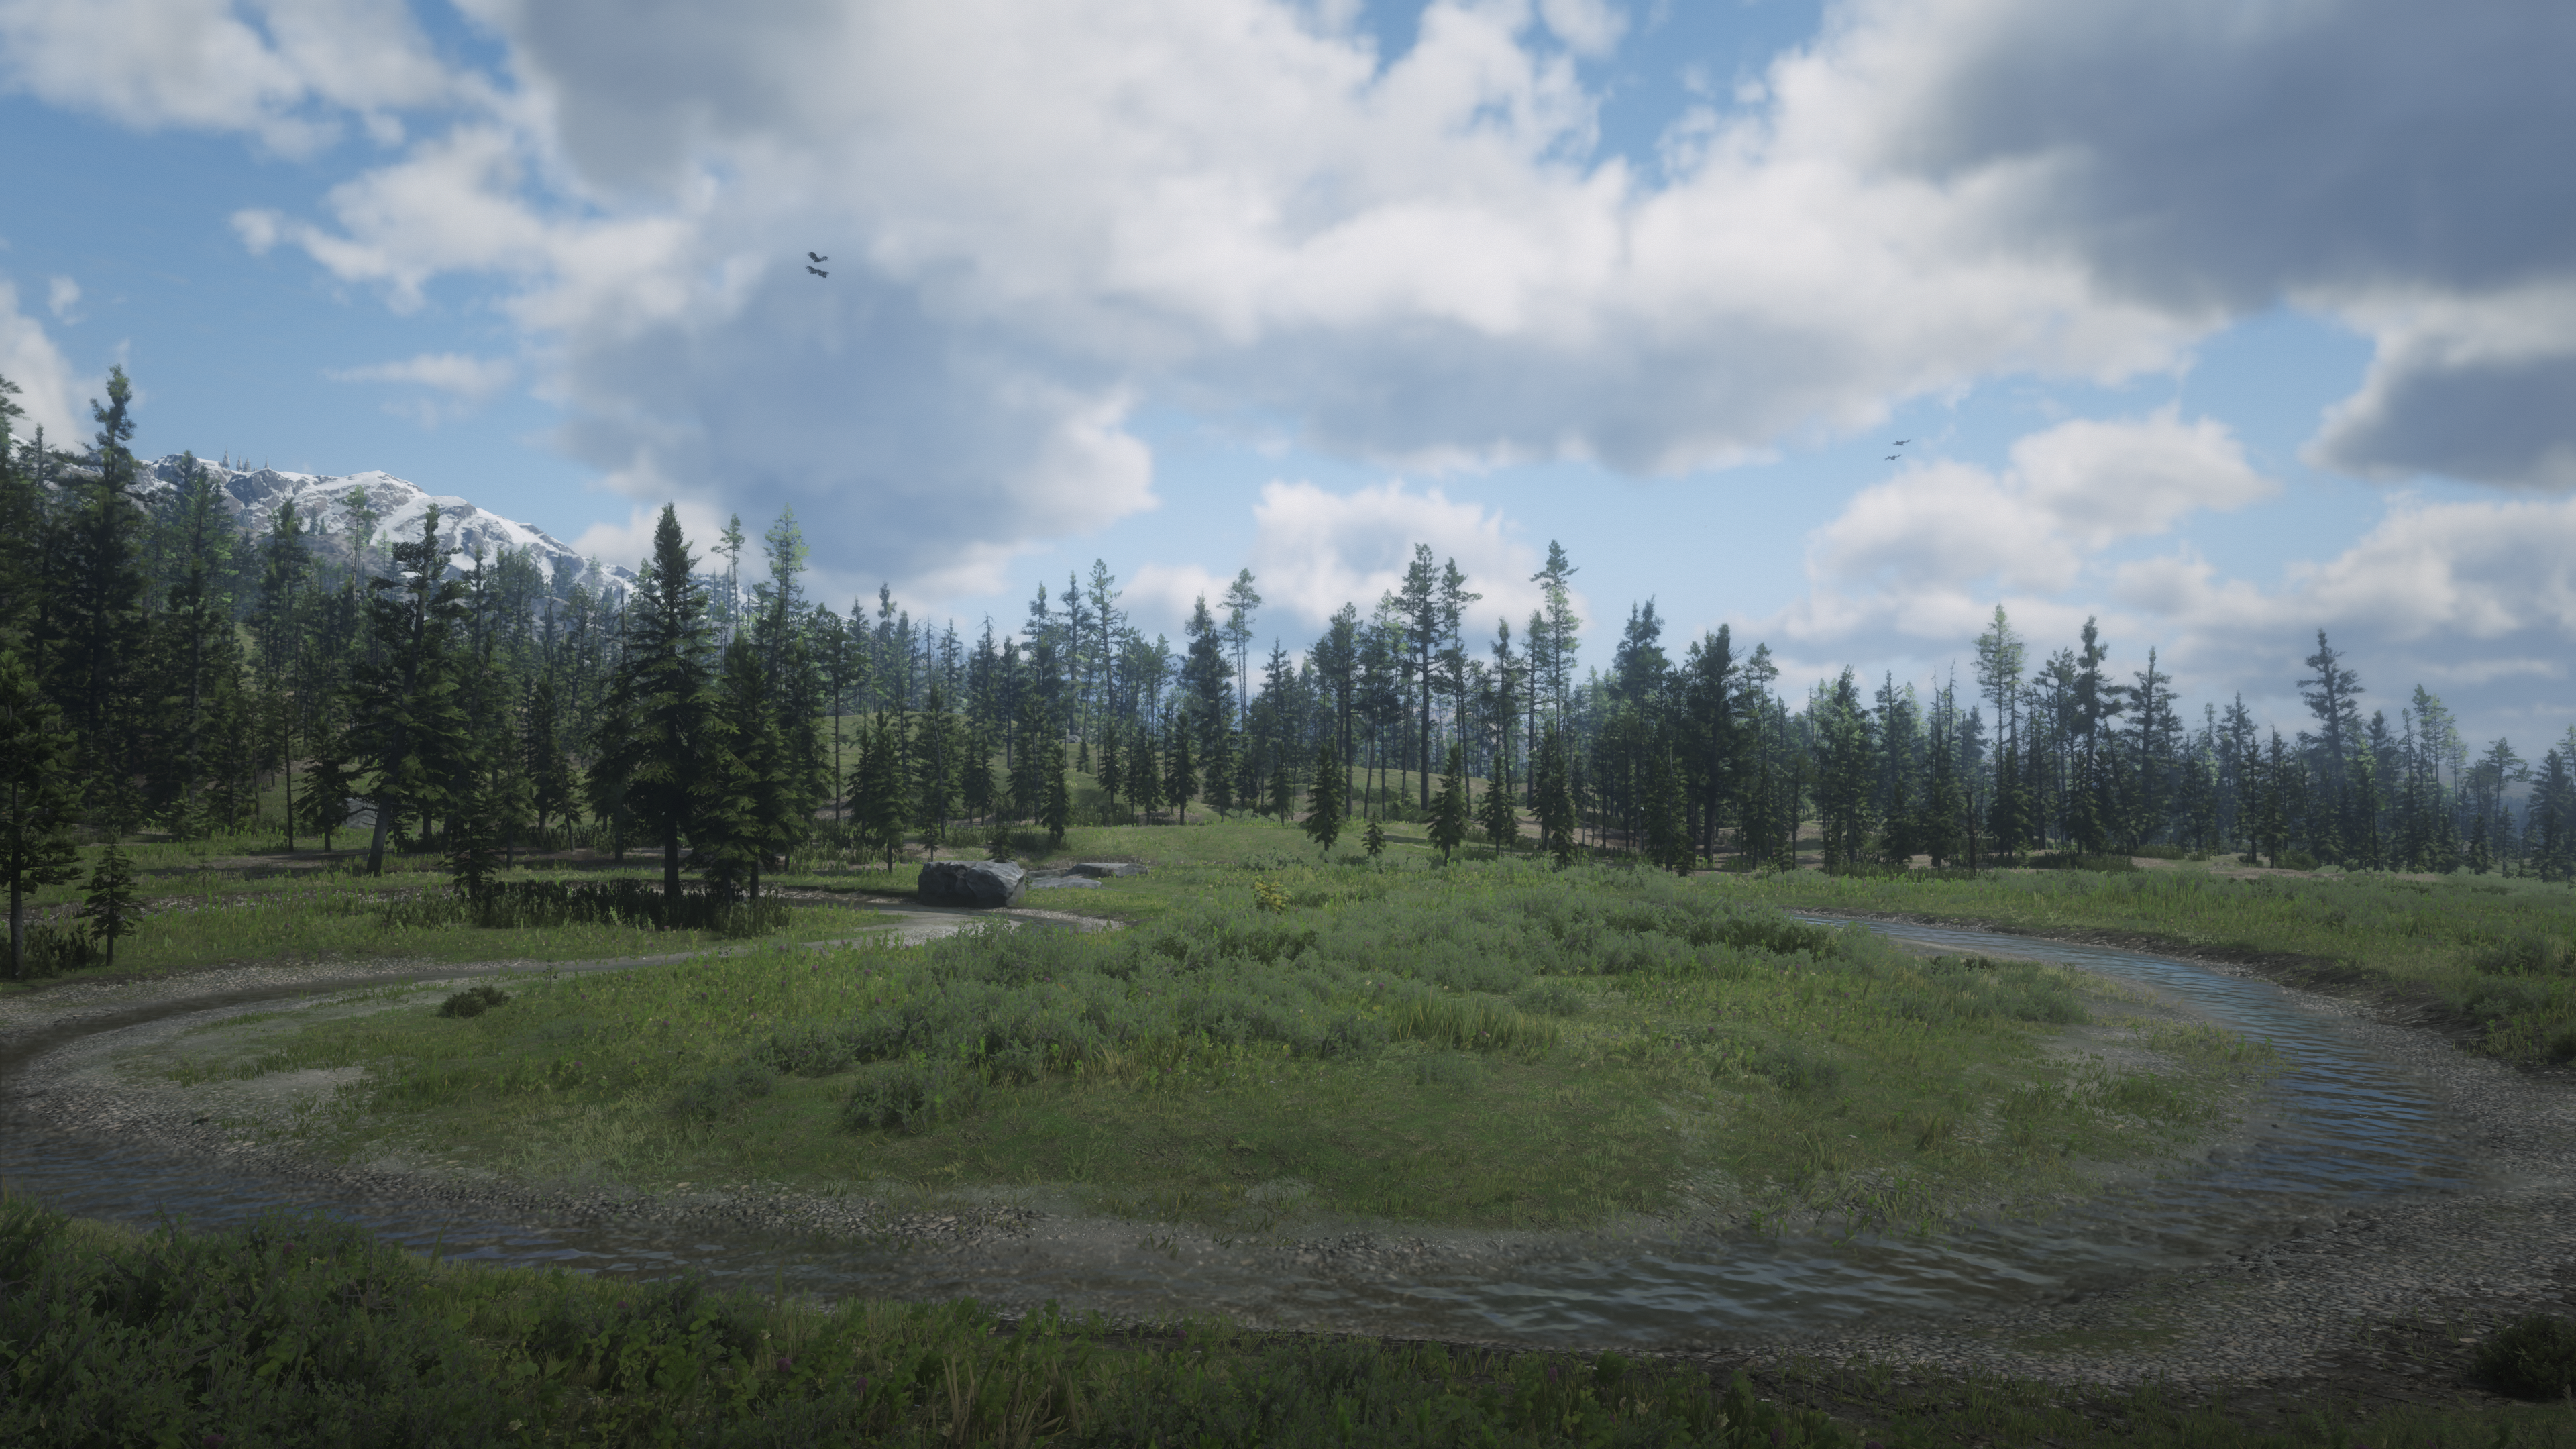 General 3840x2160 Red Dead Redemption 2 nature landscape video games trees sky clouds simple background grass